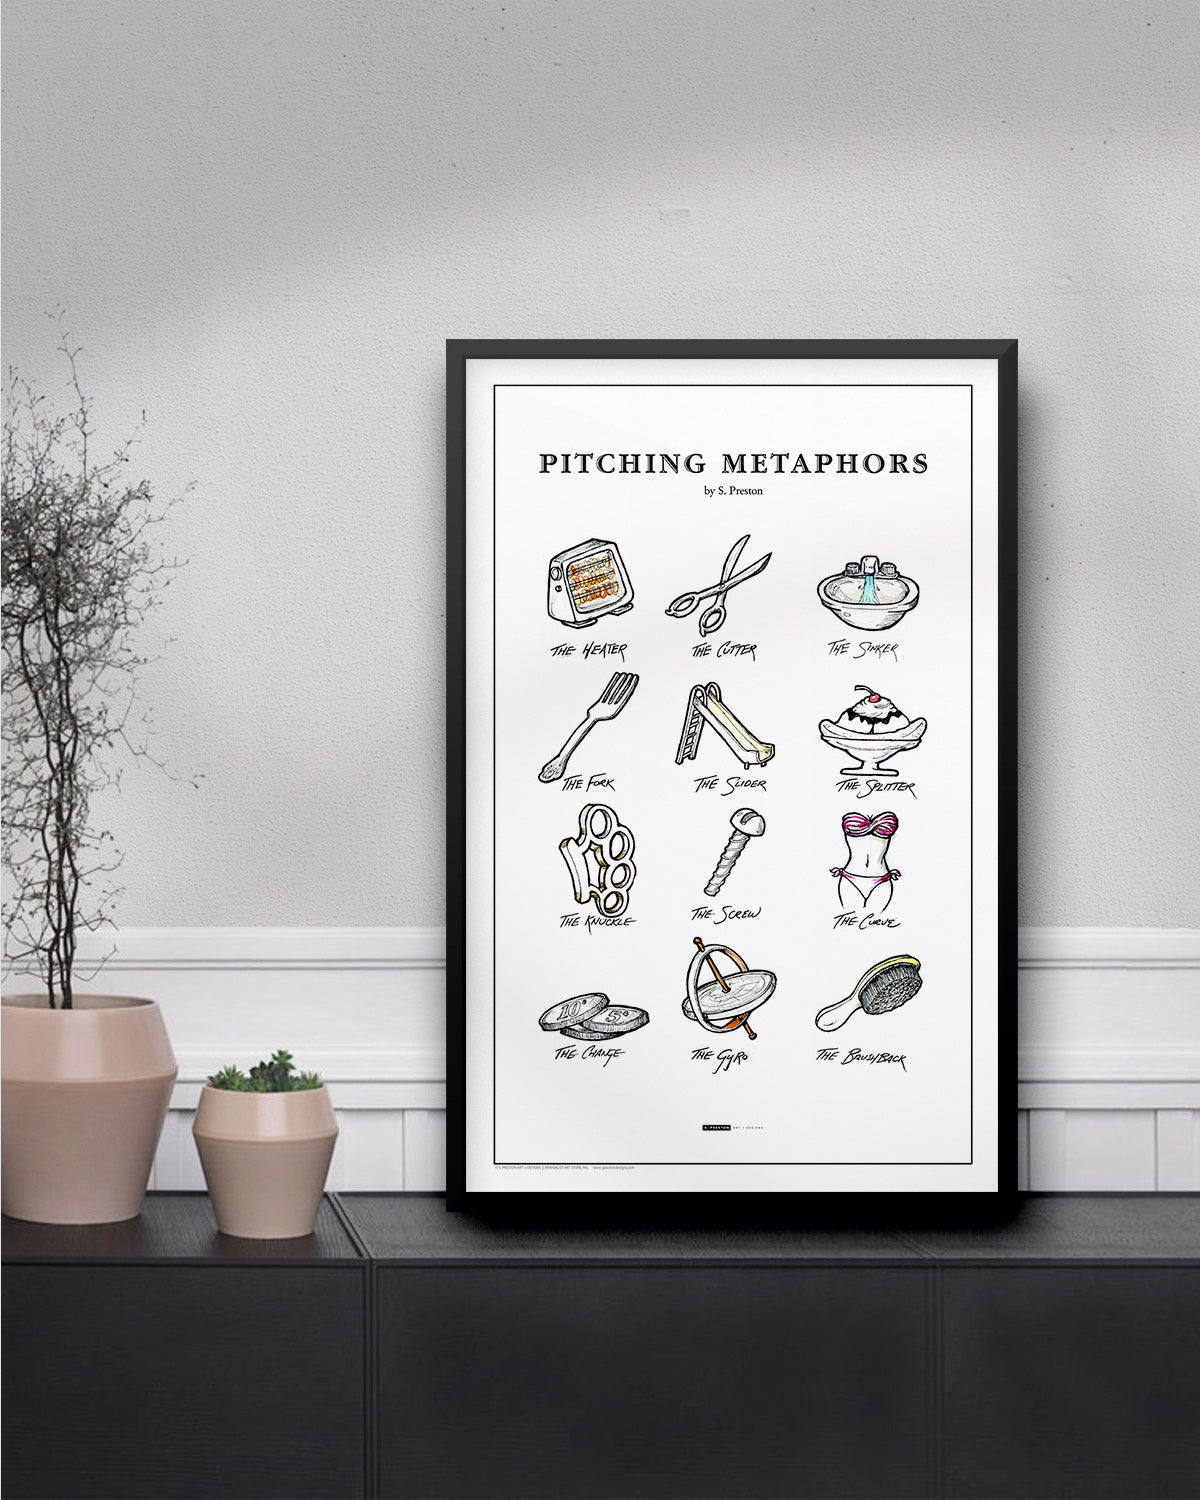 Pitching Metaphors Sketch Poster Print - 2nd Edition